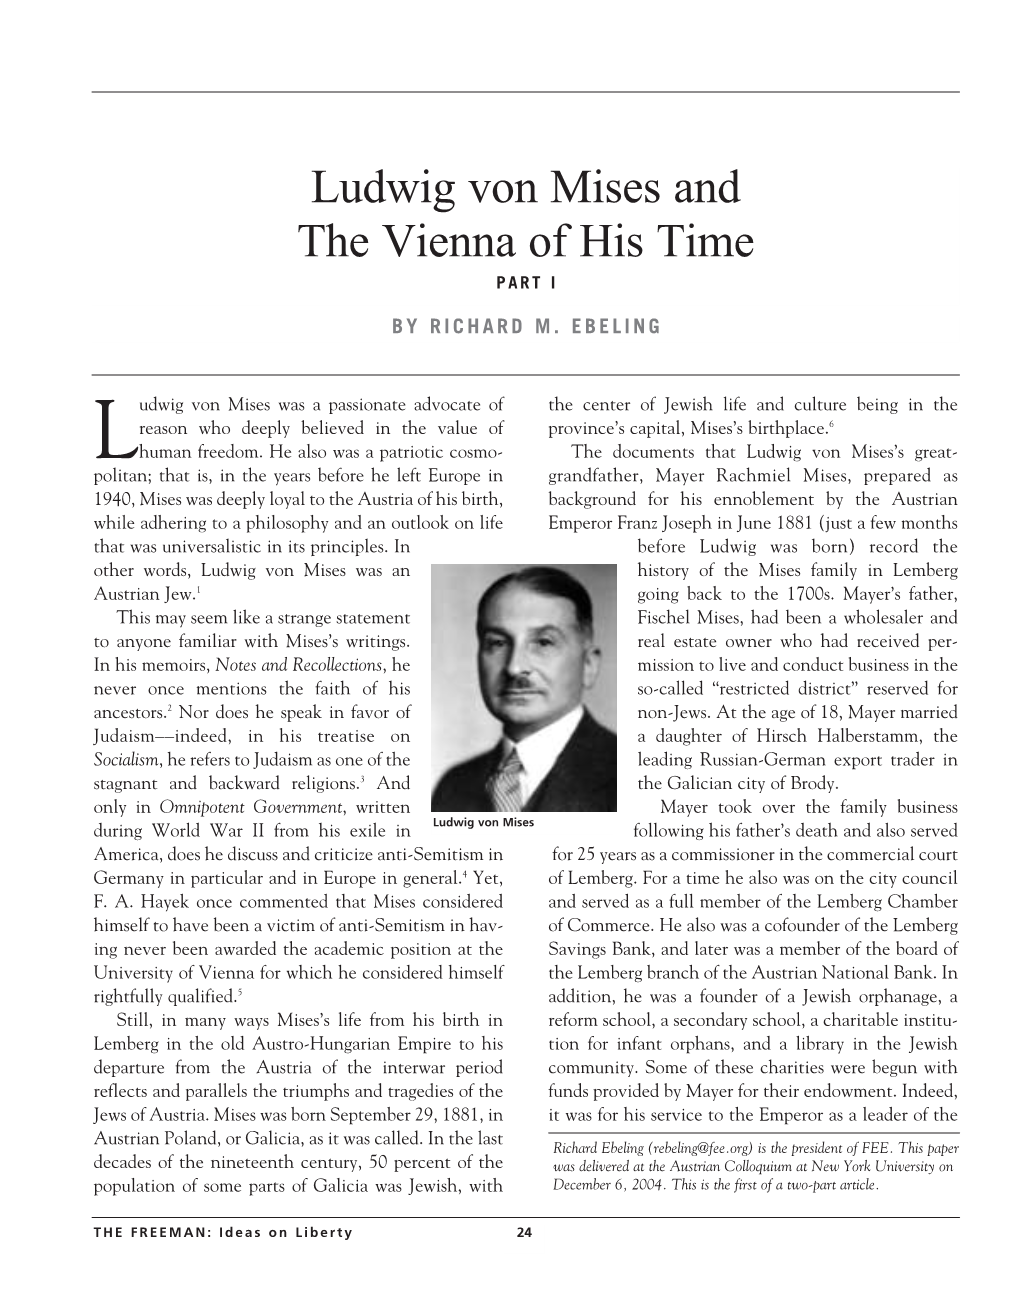 Ludwig Von Mises and the Vienna of His Time PART I